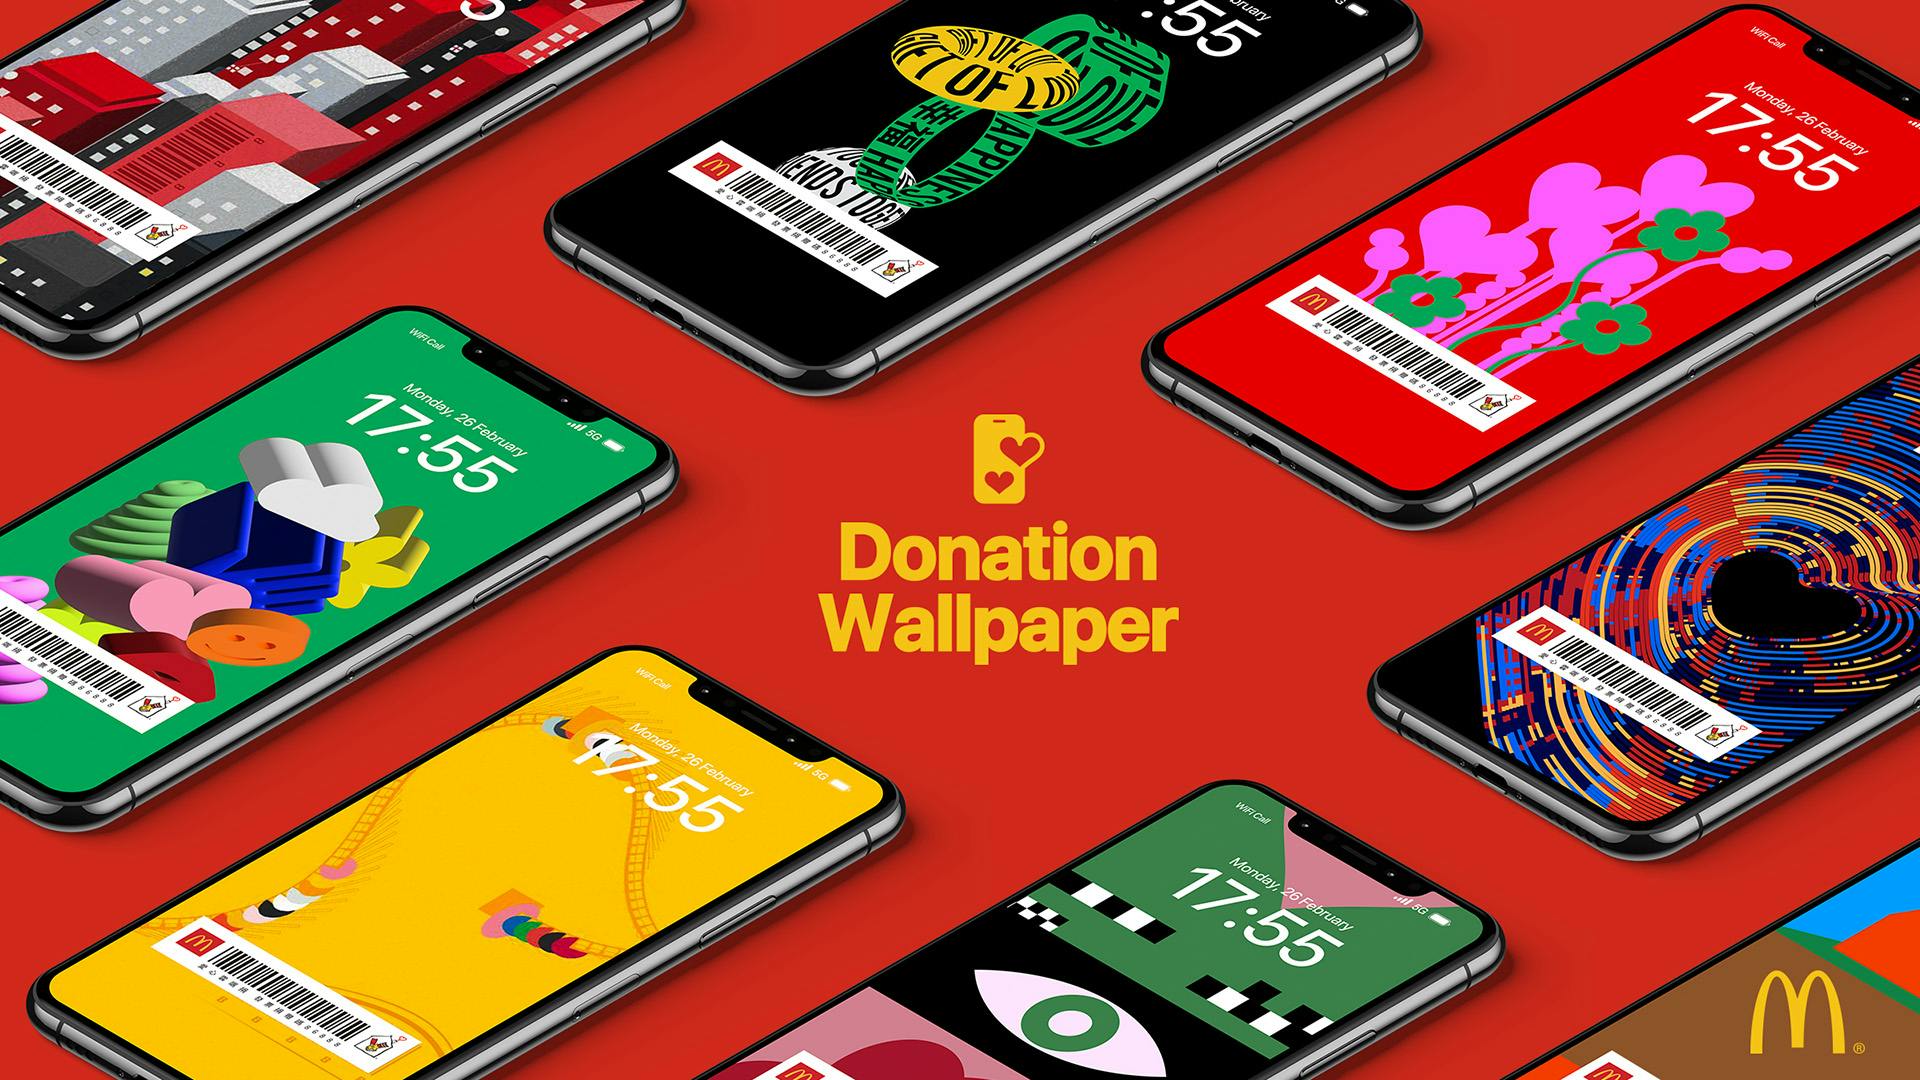 Image showing a selection of phones featuring wallpaper designs created as part of McDonald's Donation Wallpaper scheme